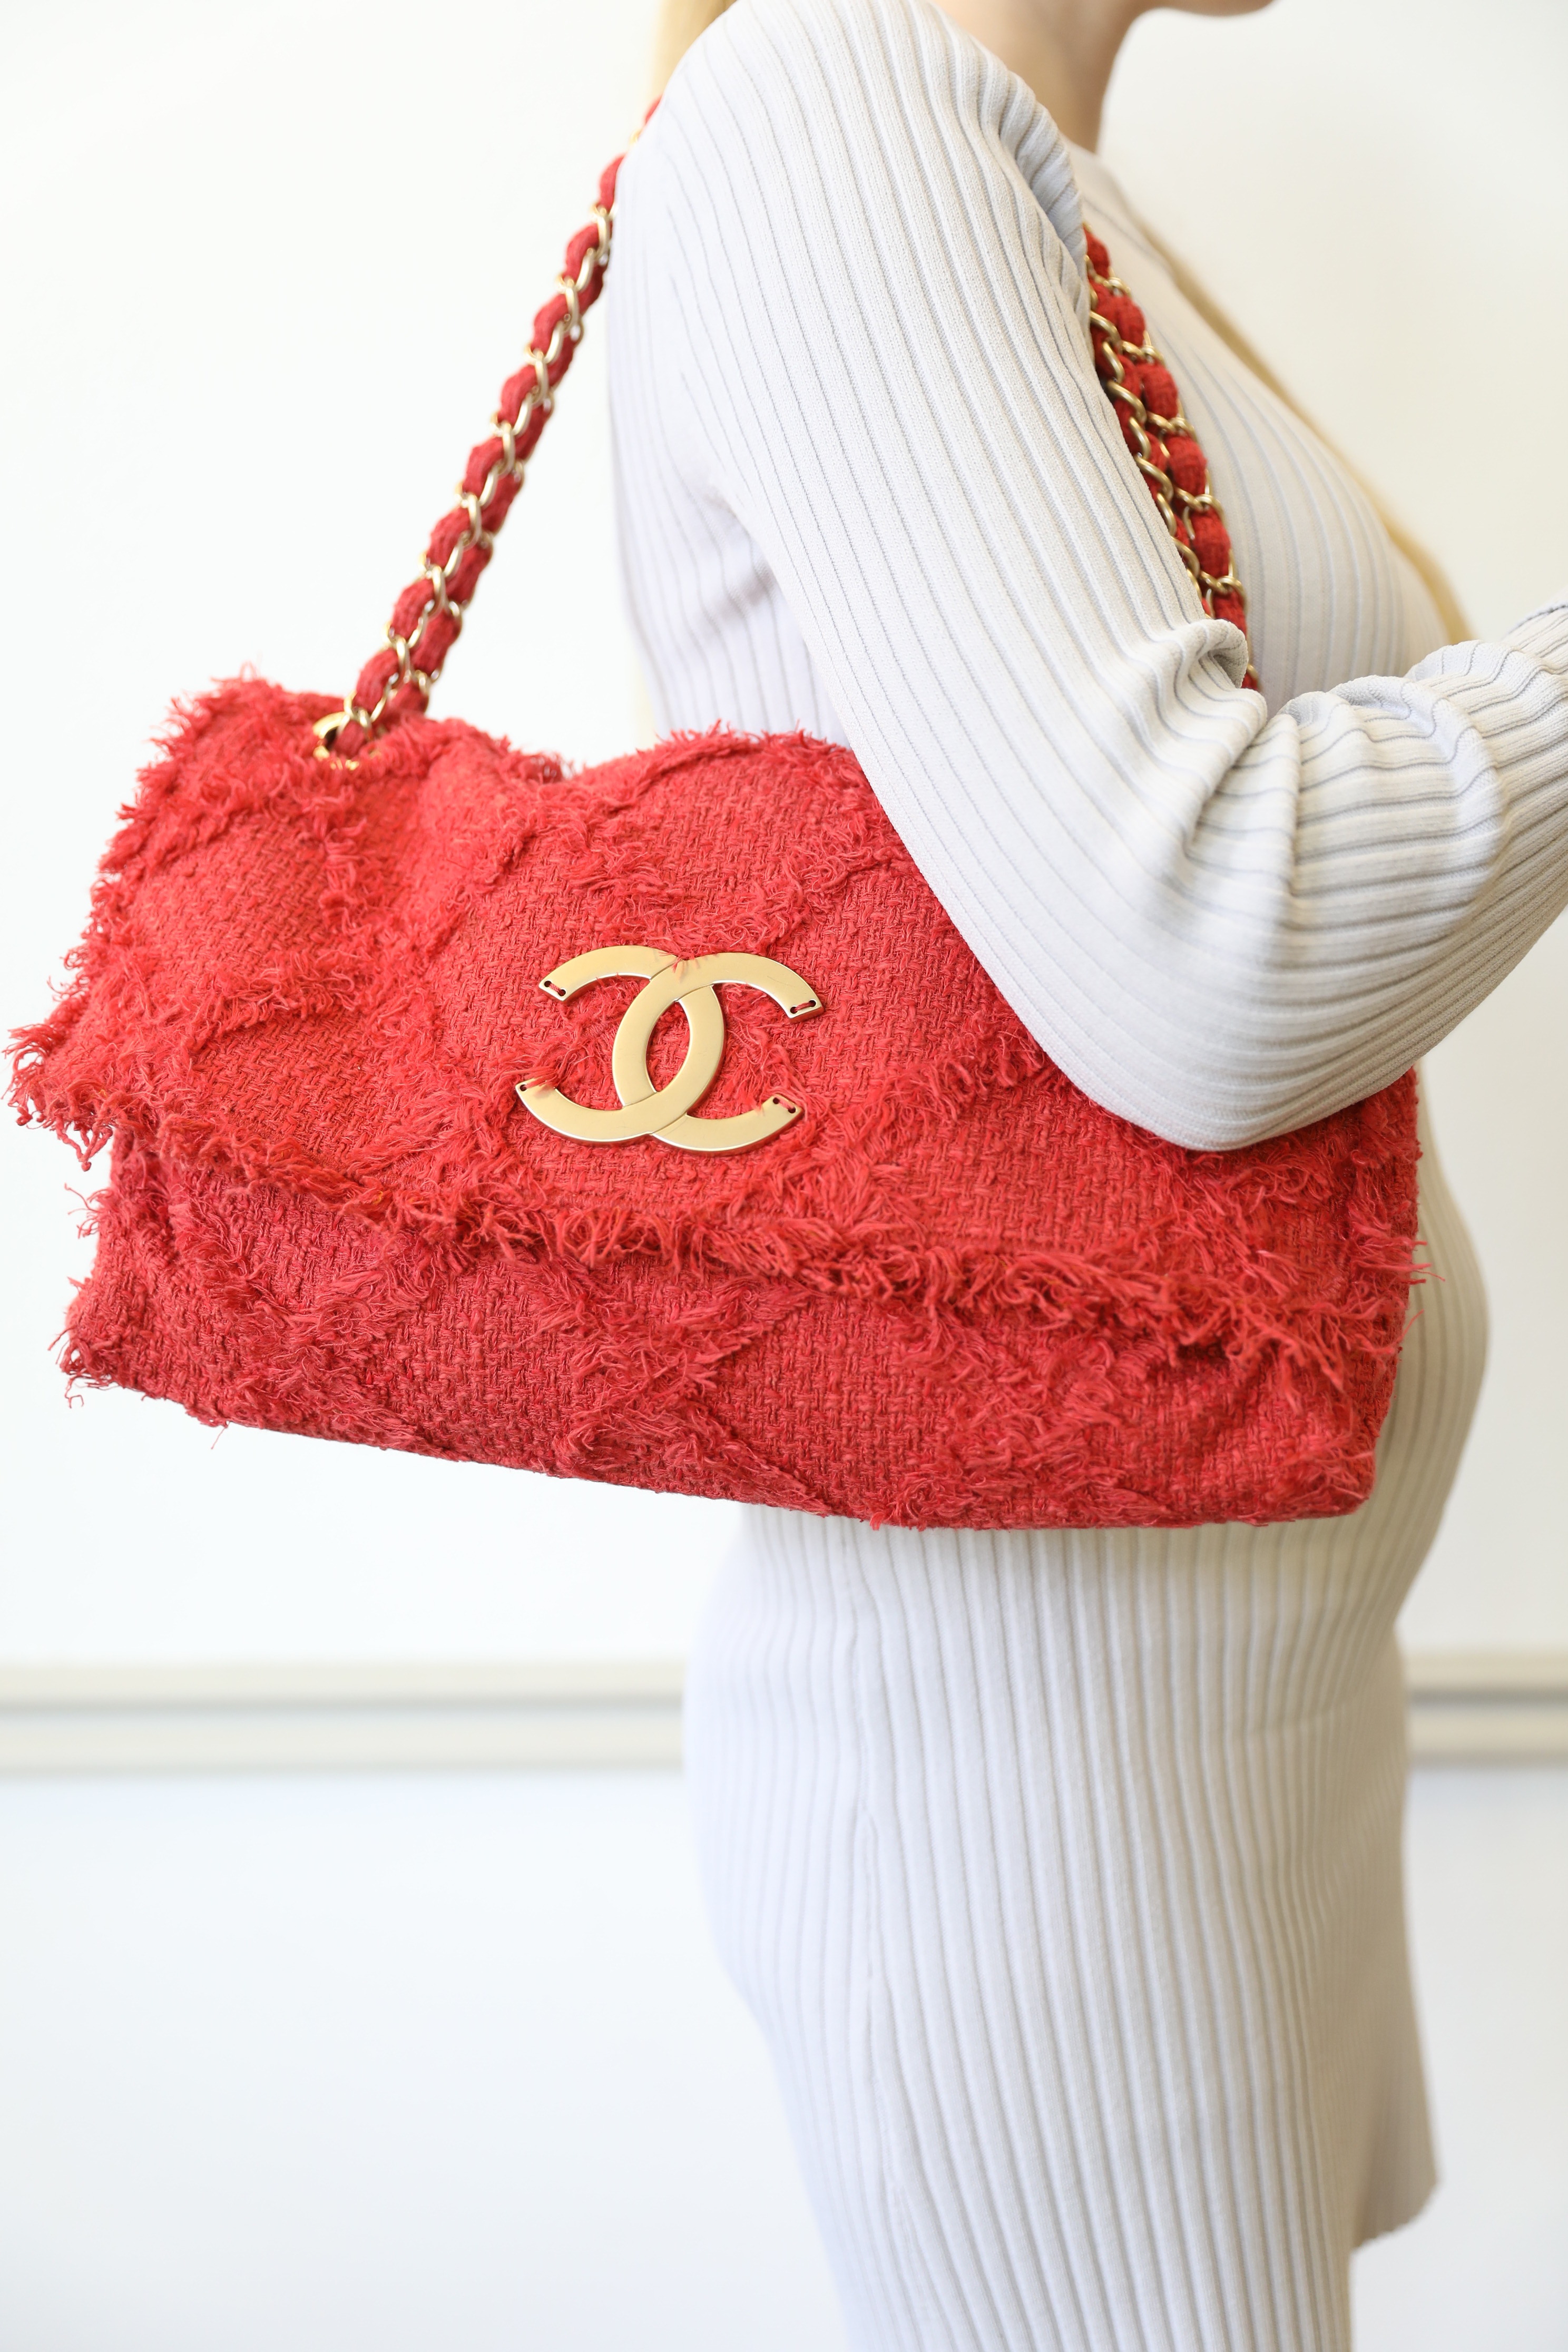 Chanel Fringe Bag, Red Tweed with Gold Hardware, Preowned No Dustbag WA001